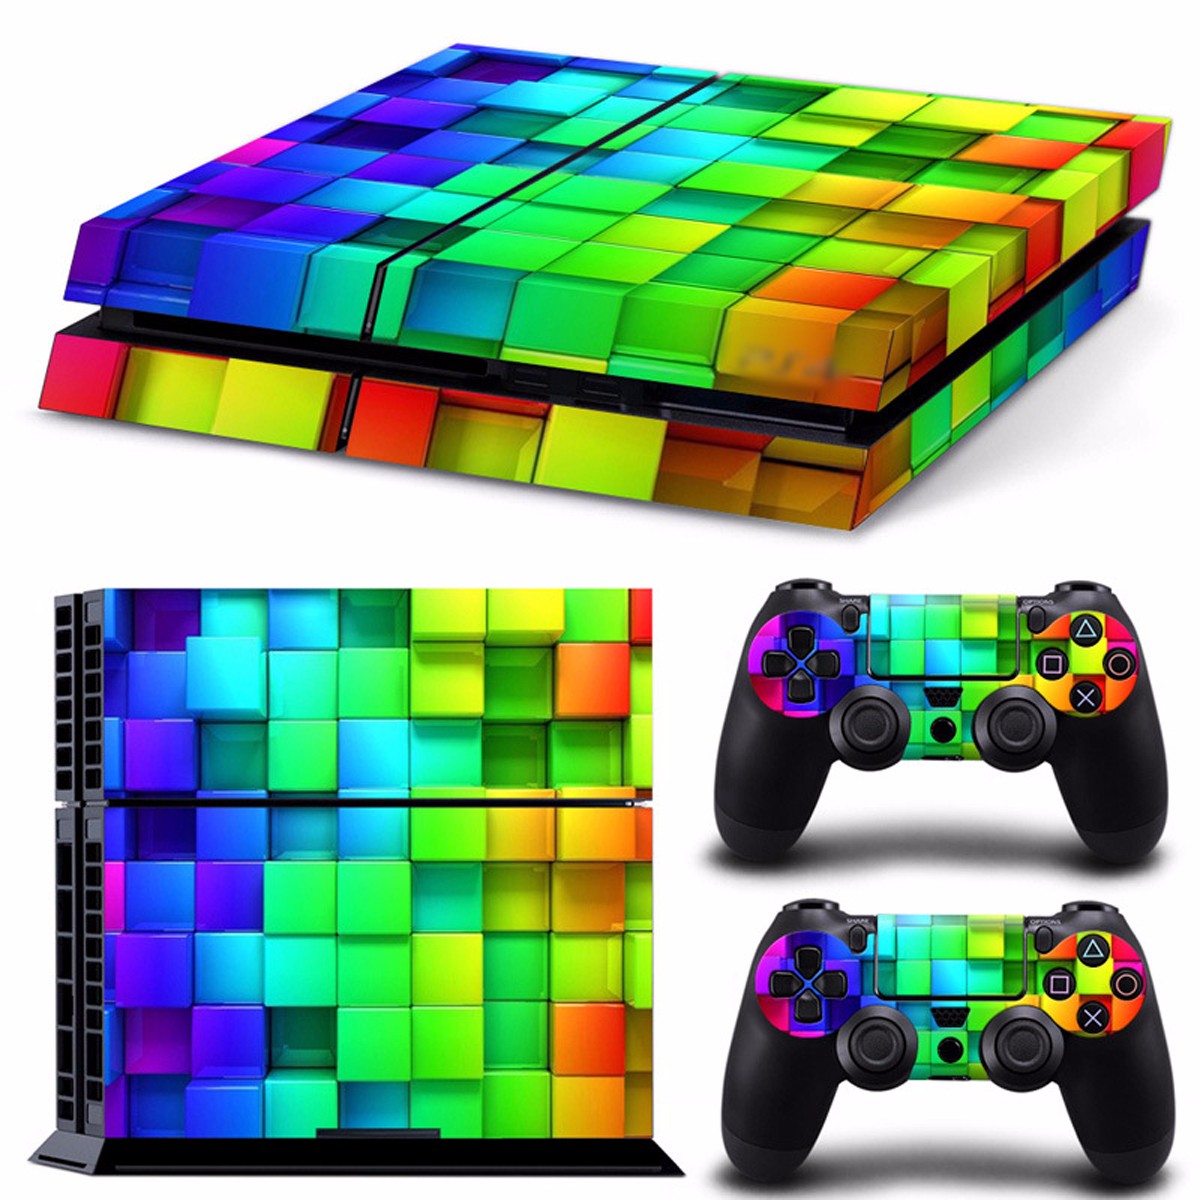 Lattice Style Vinyl Skin Decal For PS4 Play Station 4 Console and 2 Controllers 55